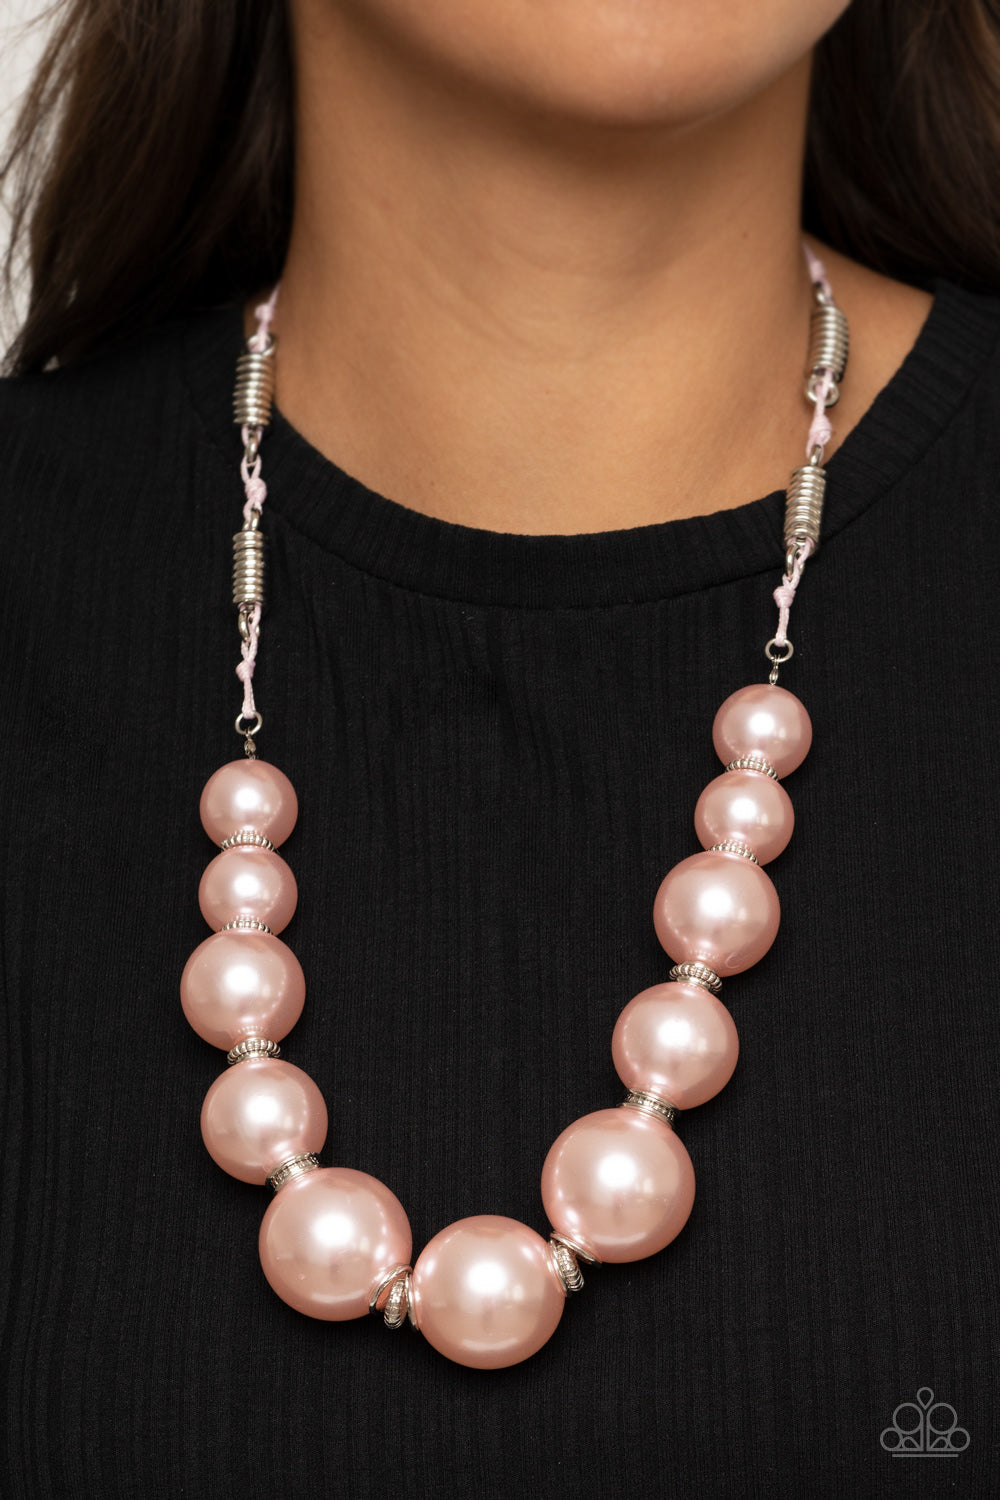 Pearly prosperity Pink - VJ Bedazzled Jewelry